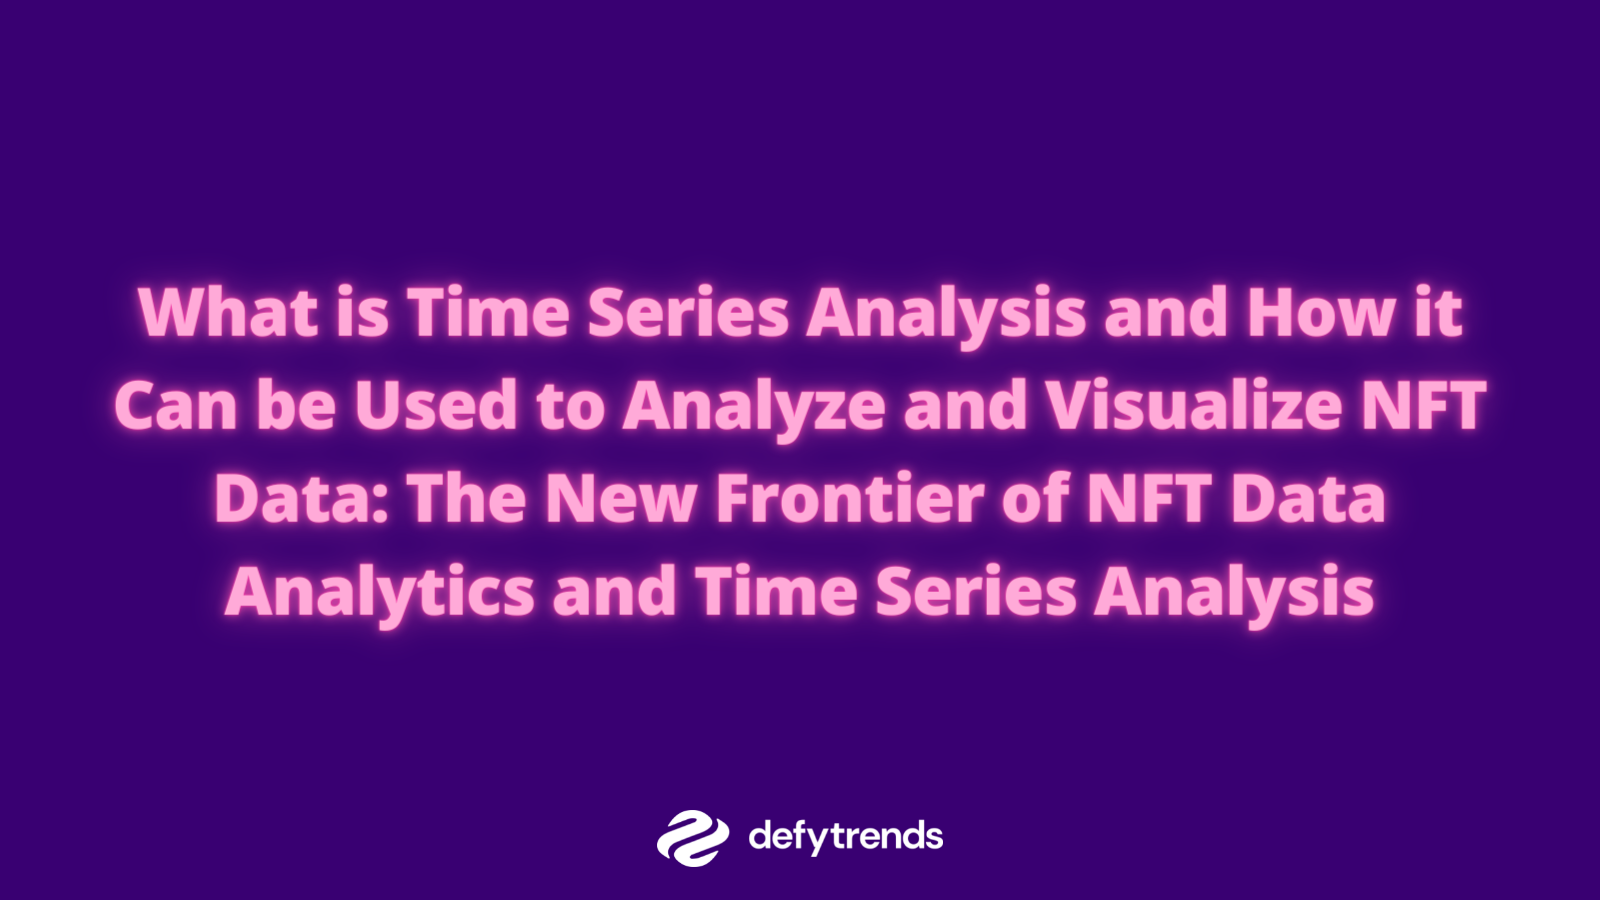 What is Time Series Analysis and How it Can be Used to Analyze and Visualize NFT Data: The New Frontier of NFT Data Analytics and Time Series Analysis